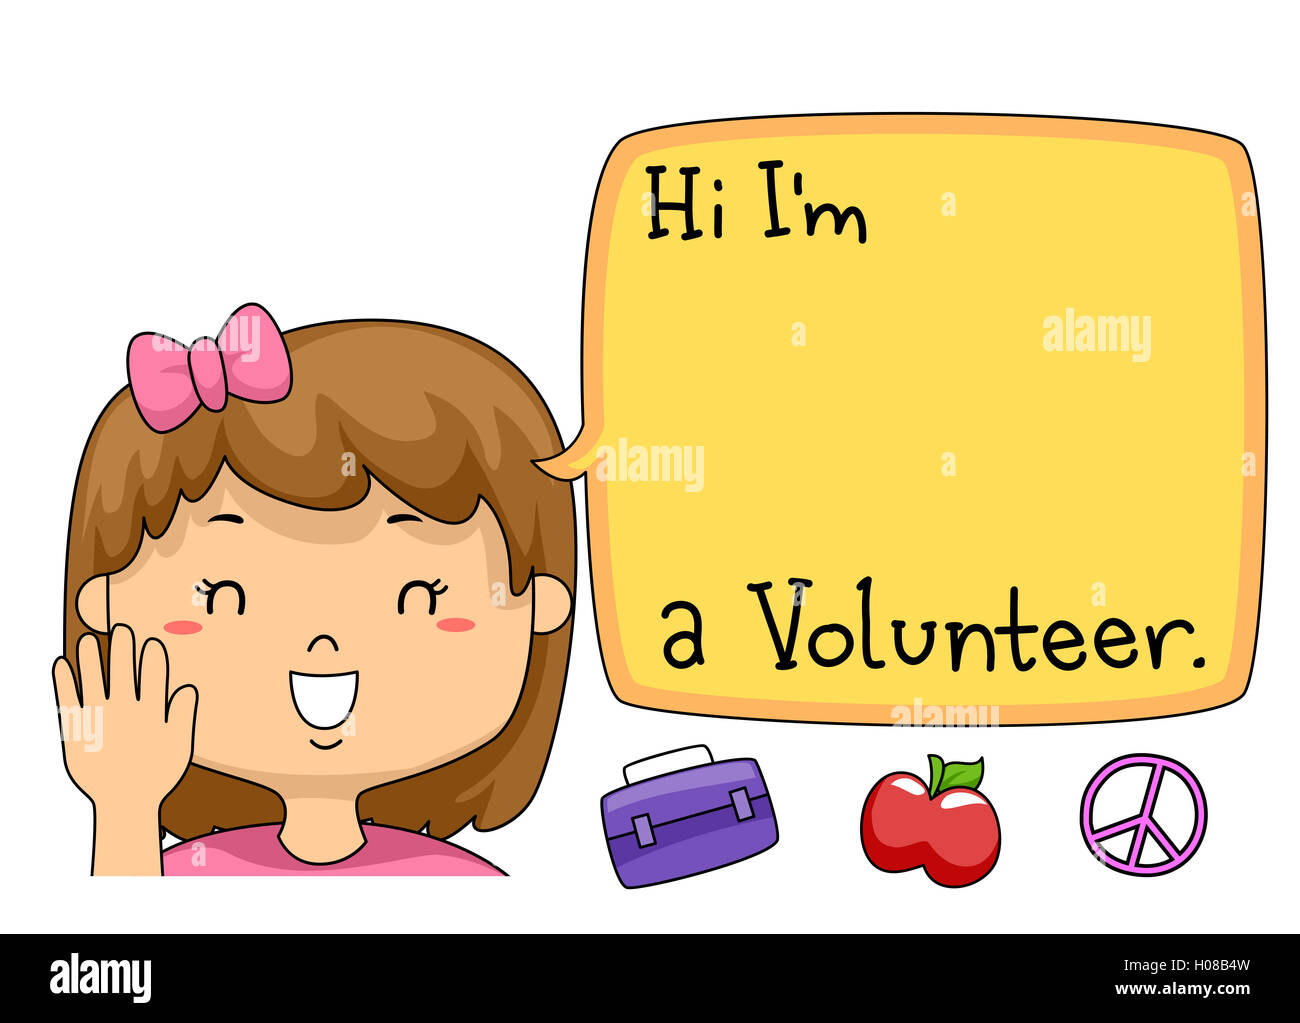 Illustration of a Young Volunteer Introducing Herself Stock Photo